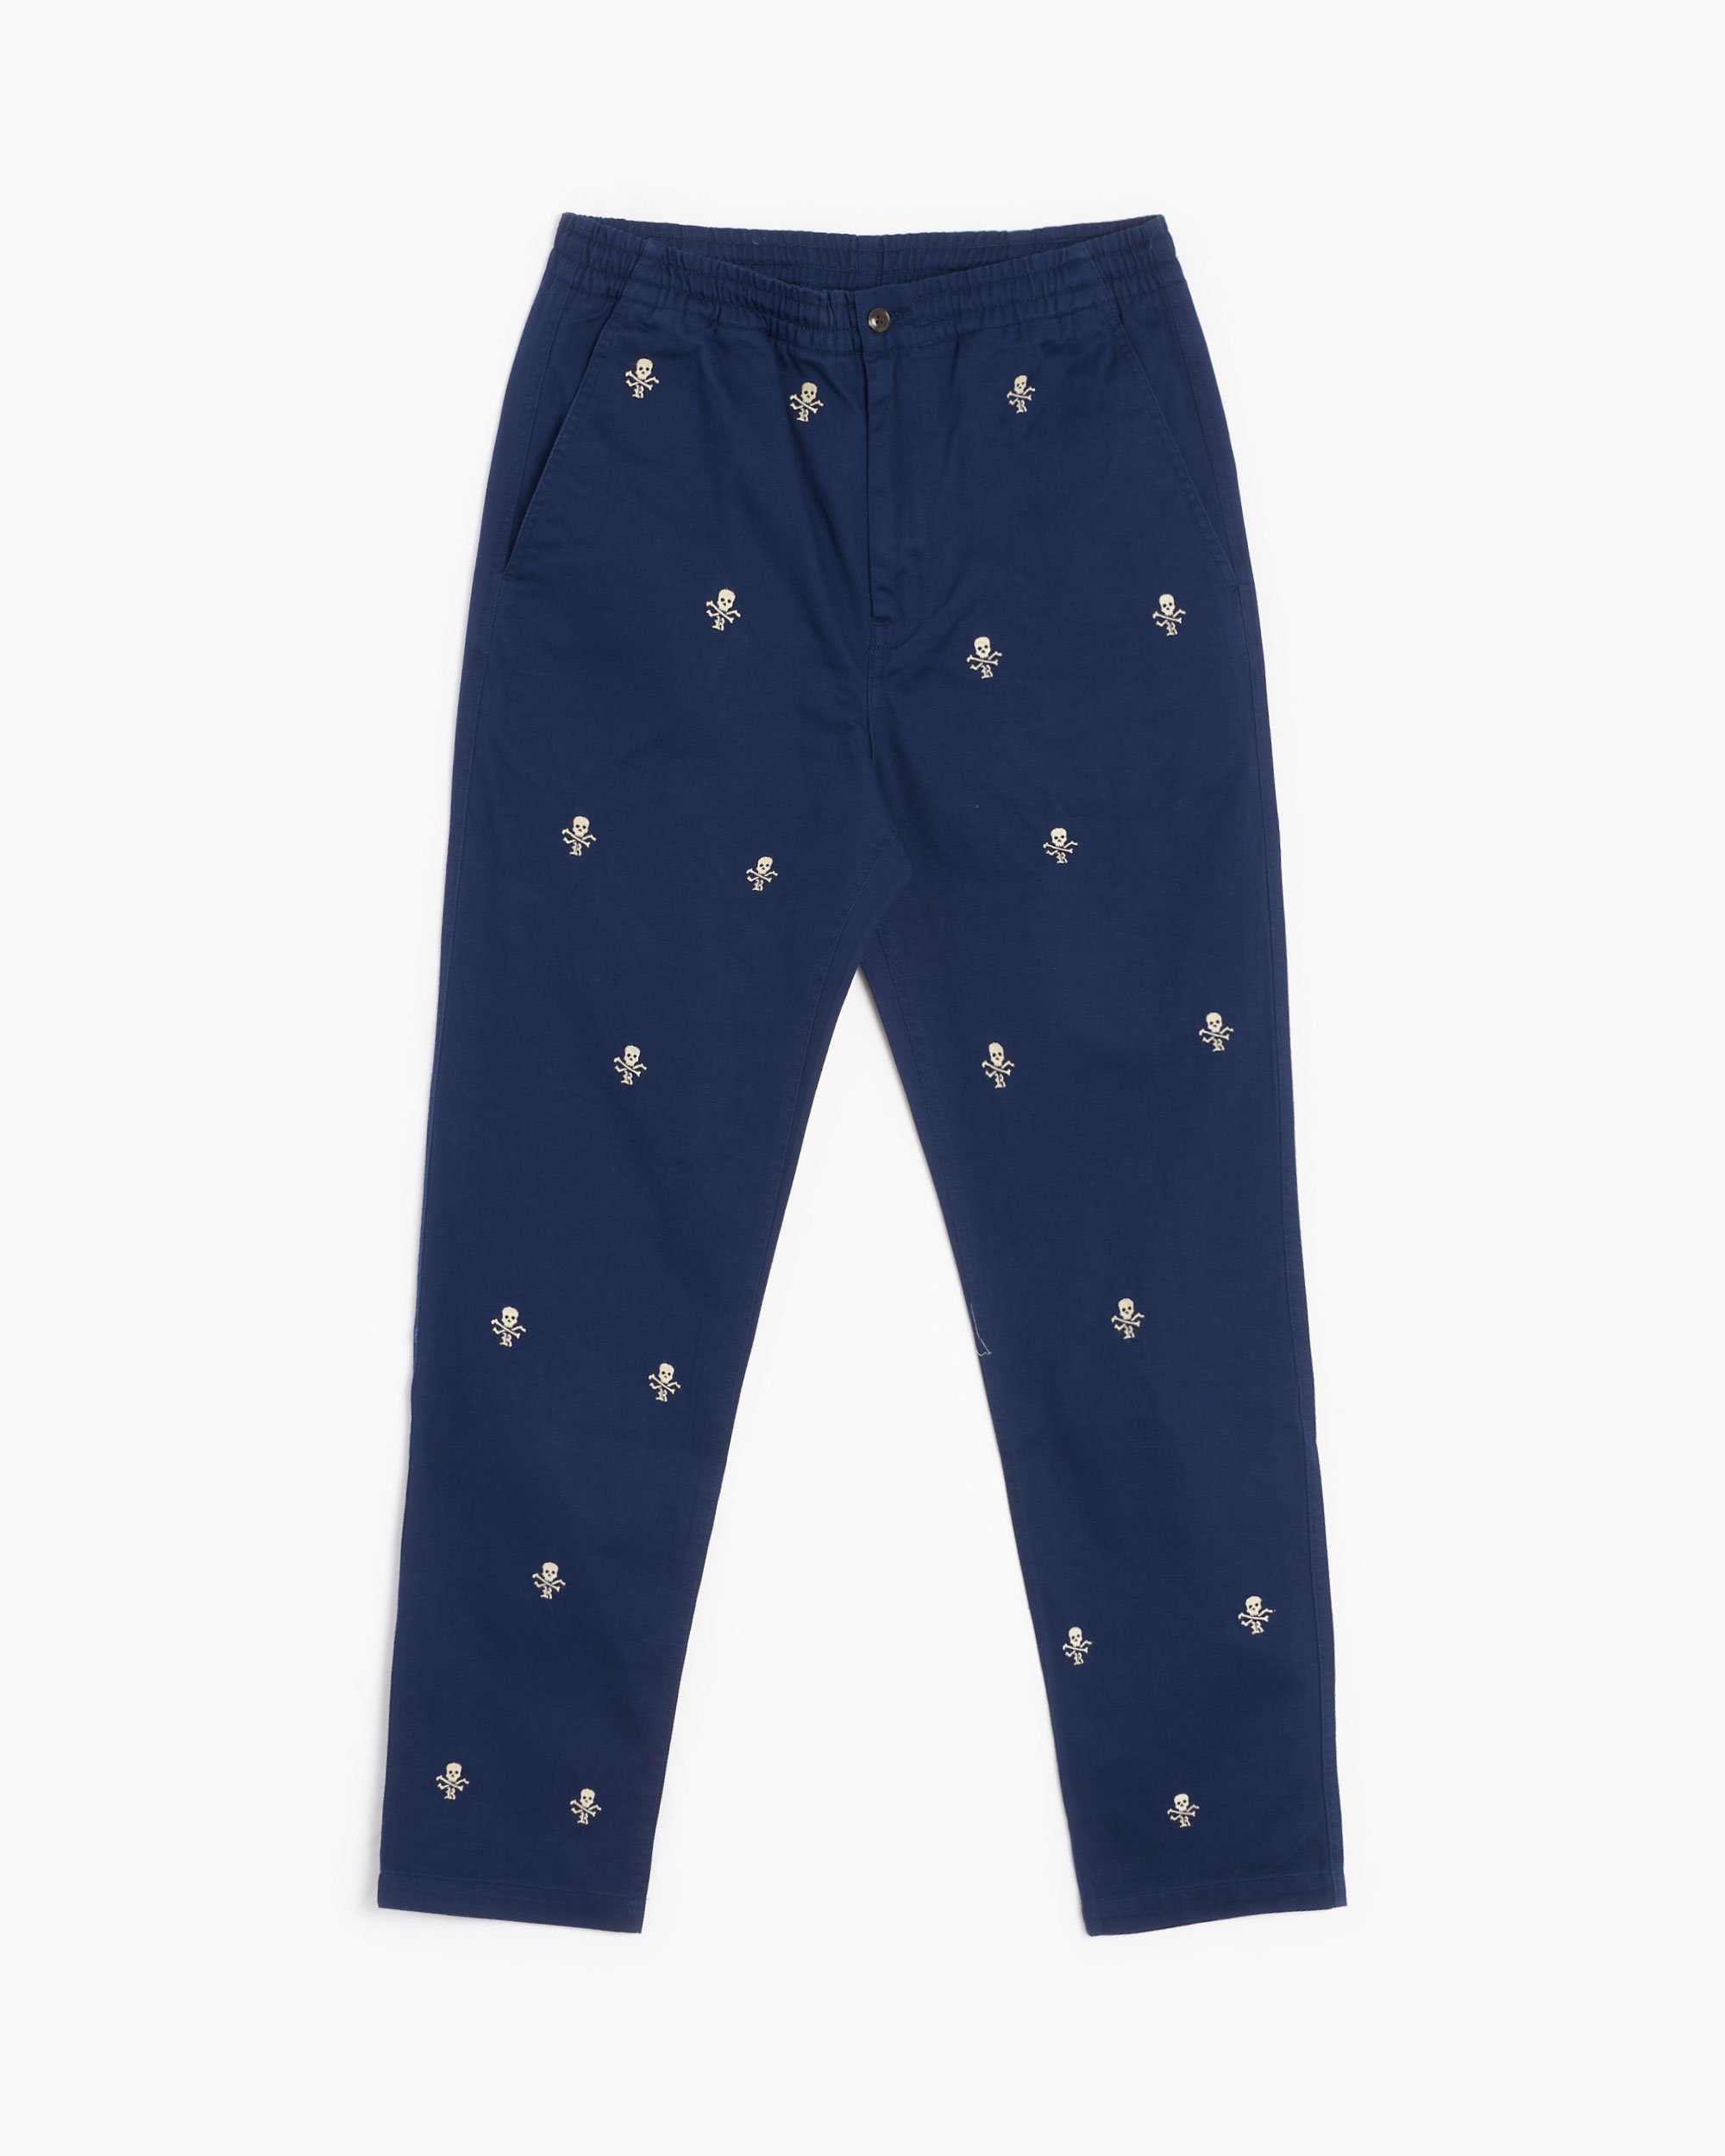 Classic Polo Men's Moderate Fit Cotton Trousers | CR-TRS-SATIN-NAVY MF